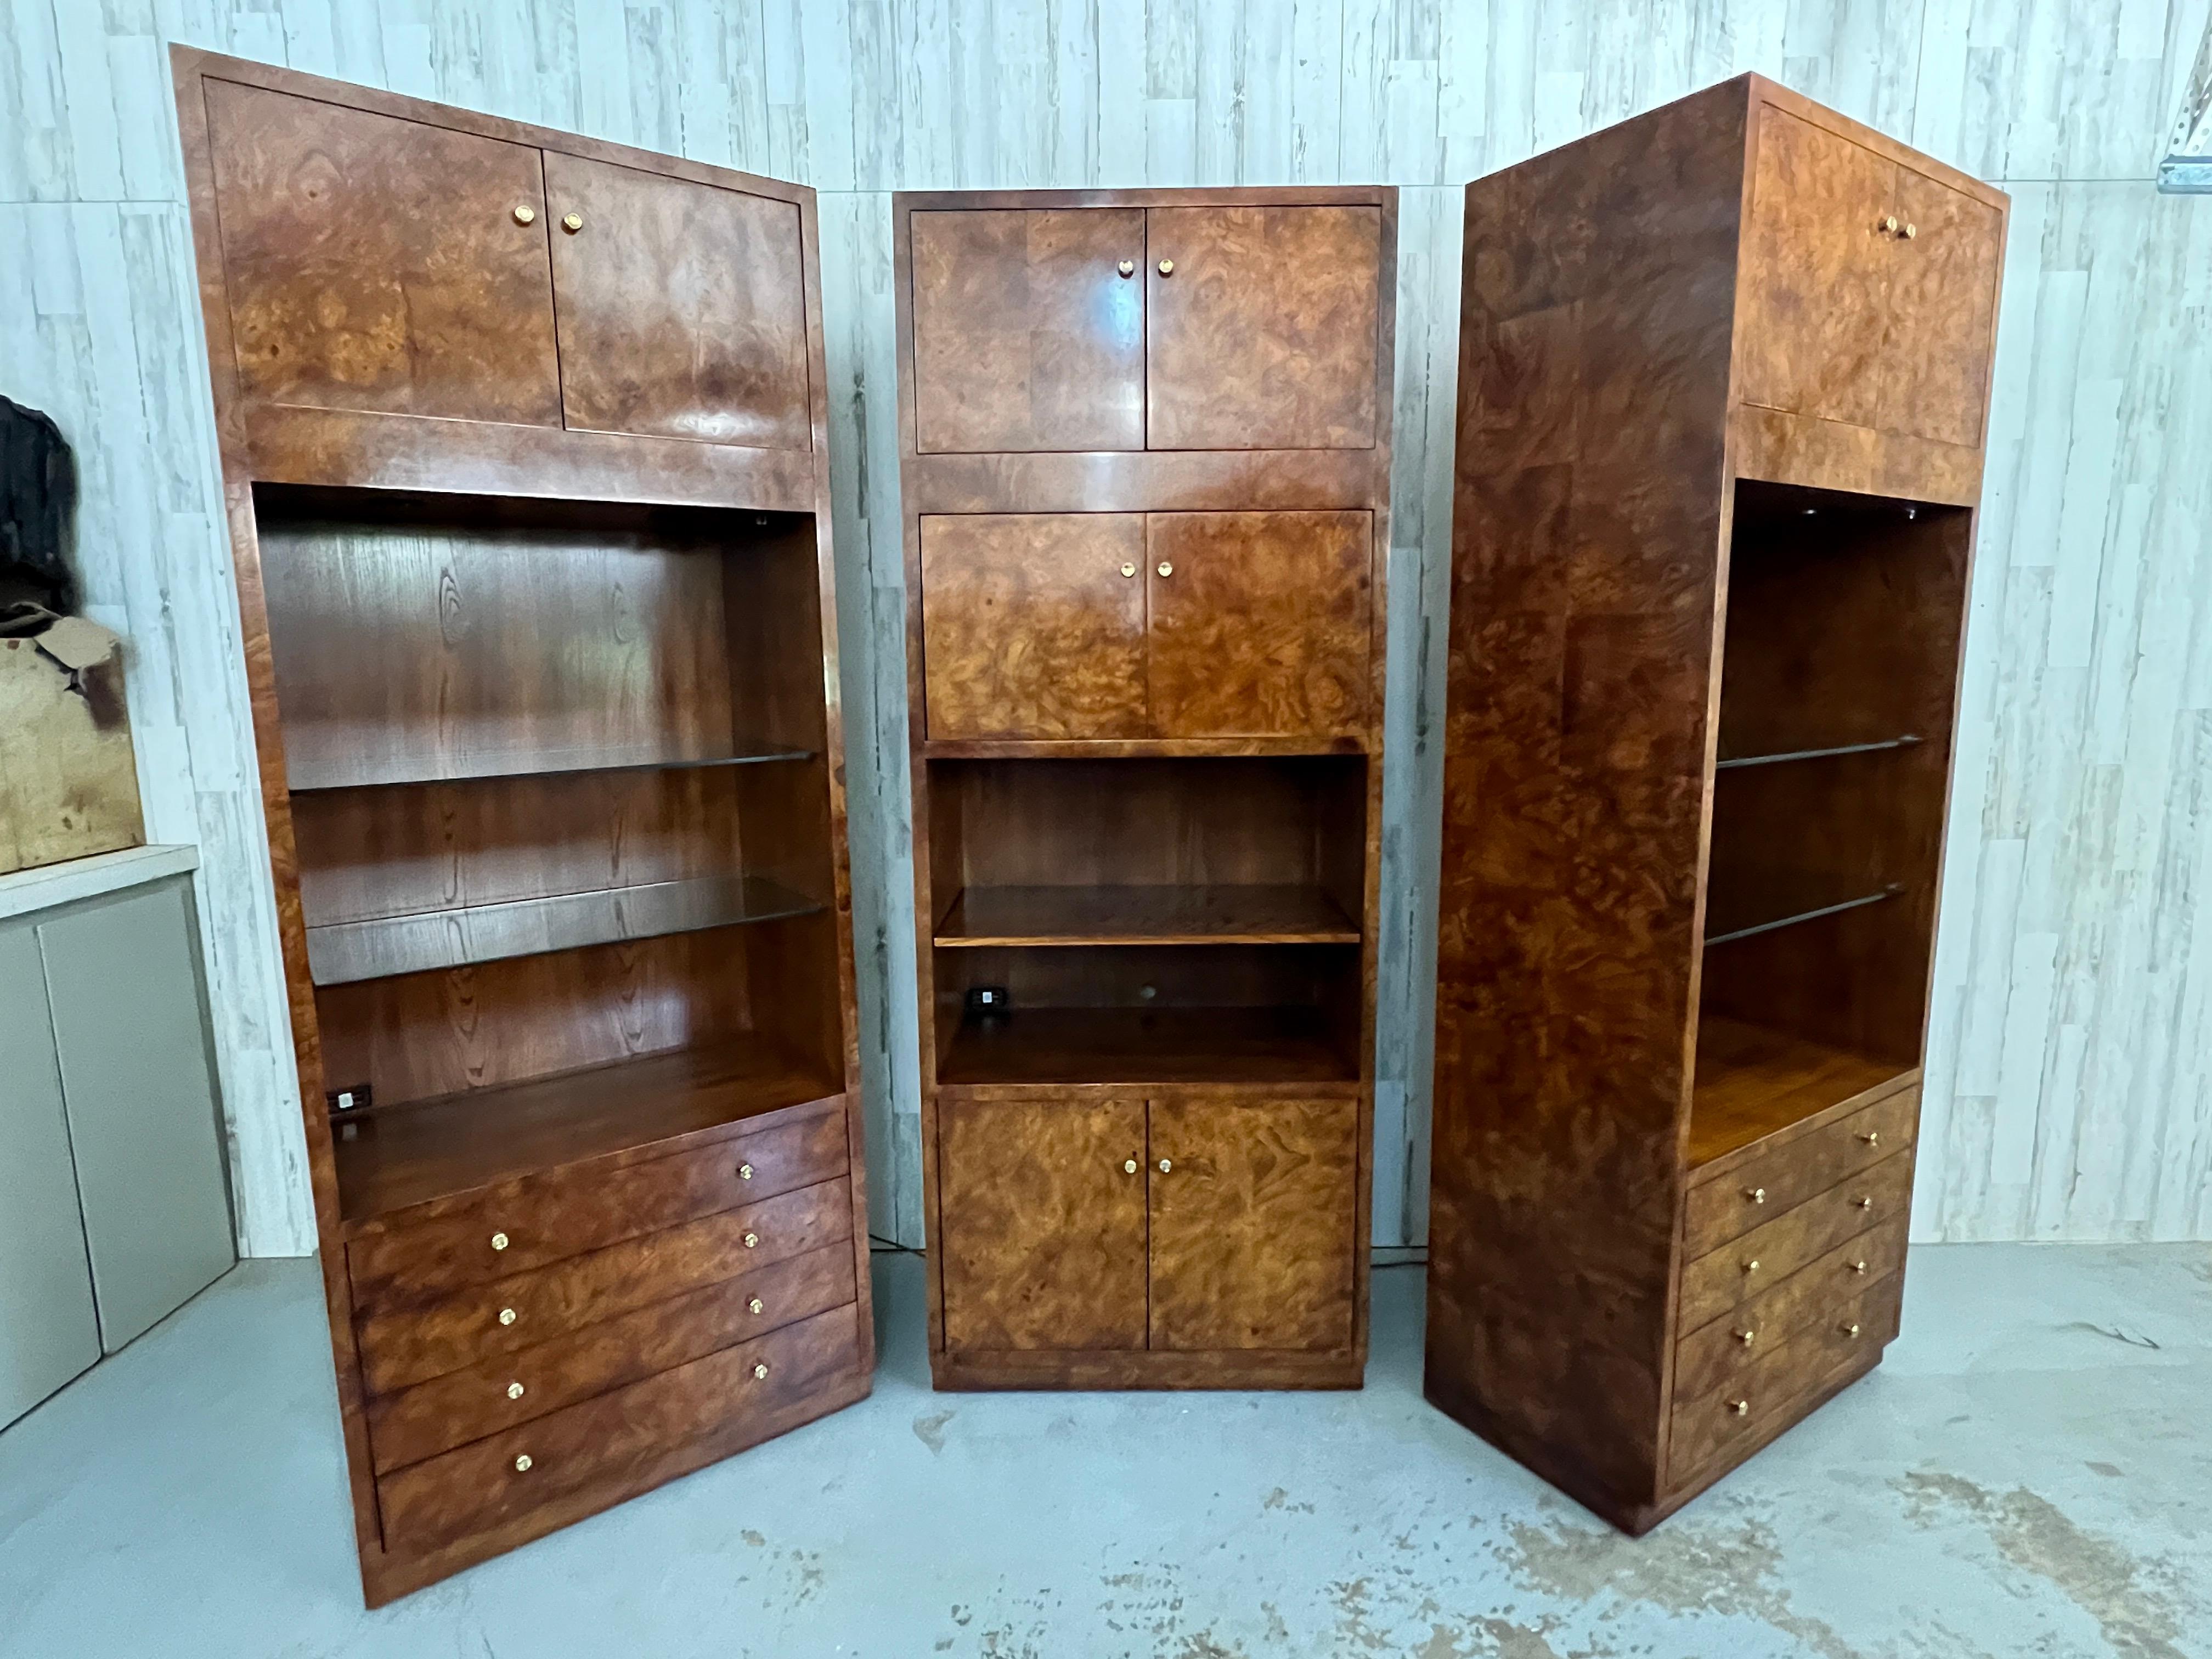 Set of three cabinets with elm burl wood veneer. Recessed lighting in two of the cabinets to illuminate the adjustable glass shelving. Built in electrical outlets for media devices. Brass hardware is a stunning accent to the burl wood.
 Cabinets